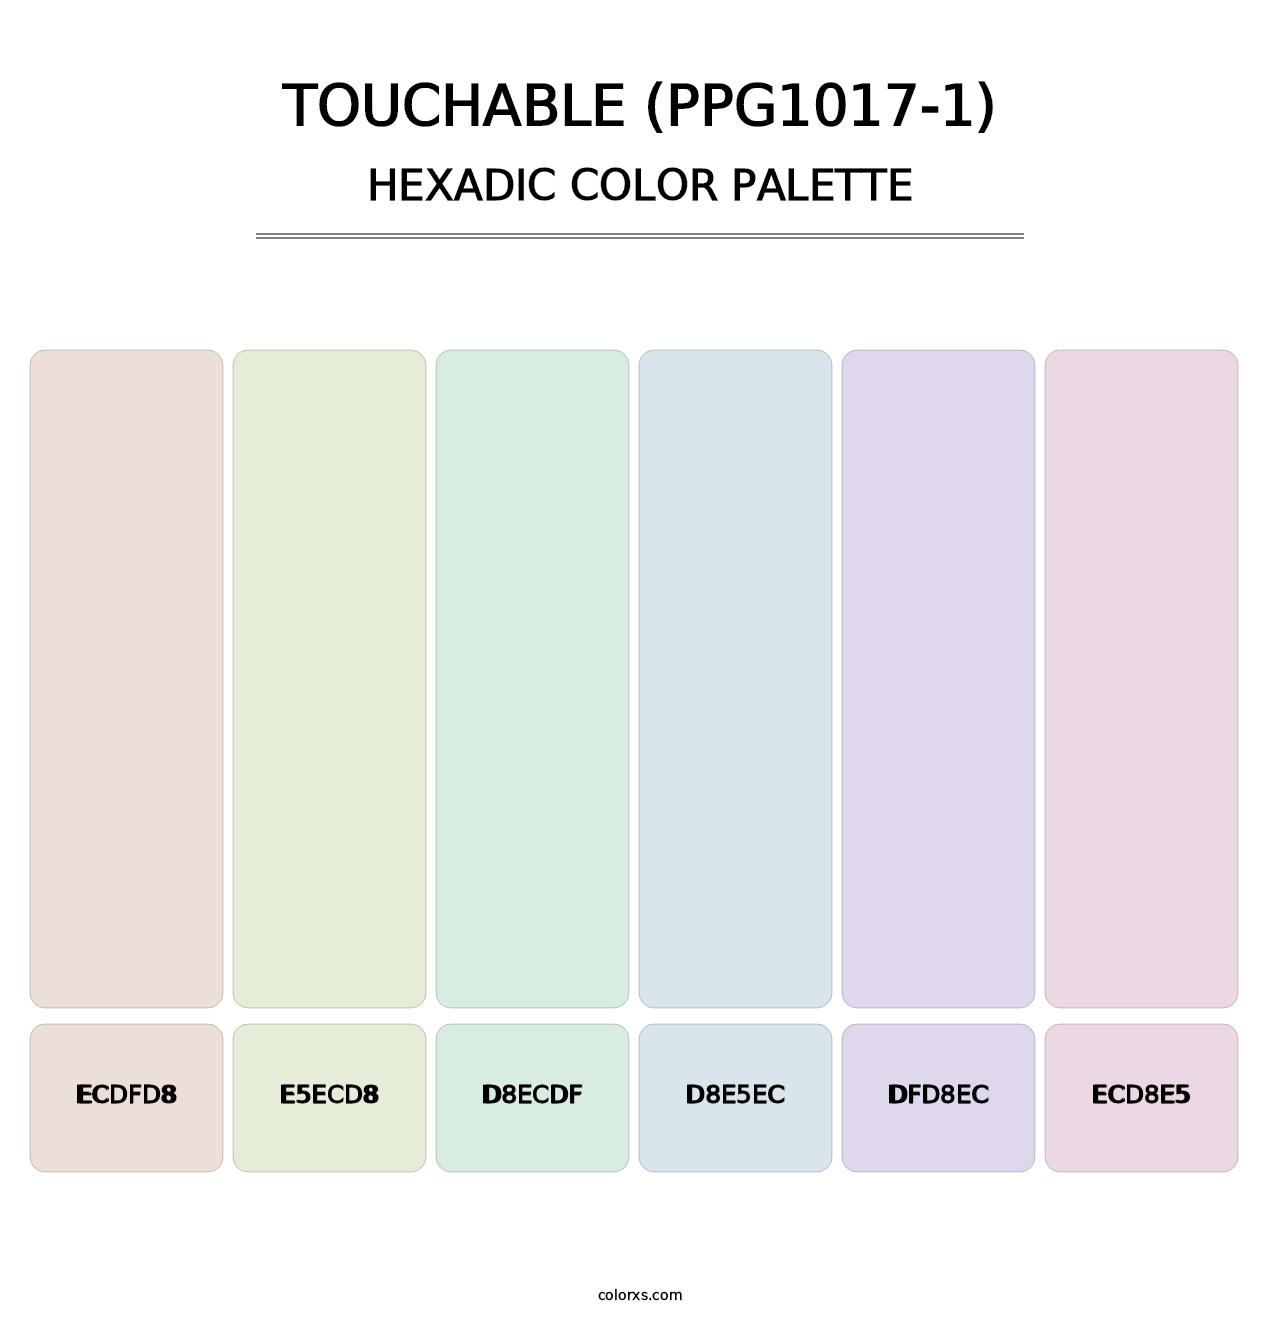 Touchable (PPG1017-1) - Hexadic Color Palette